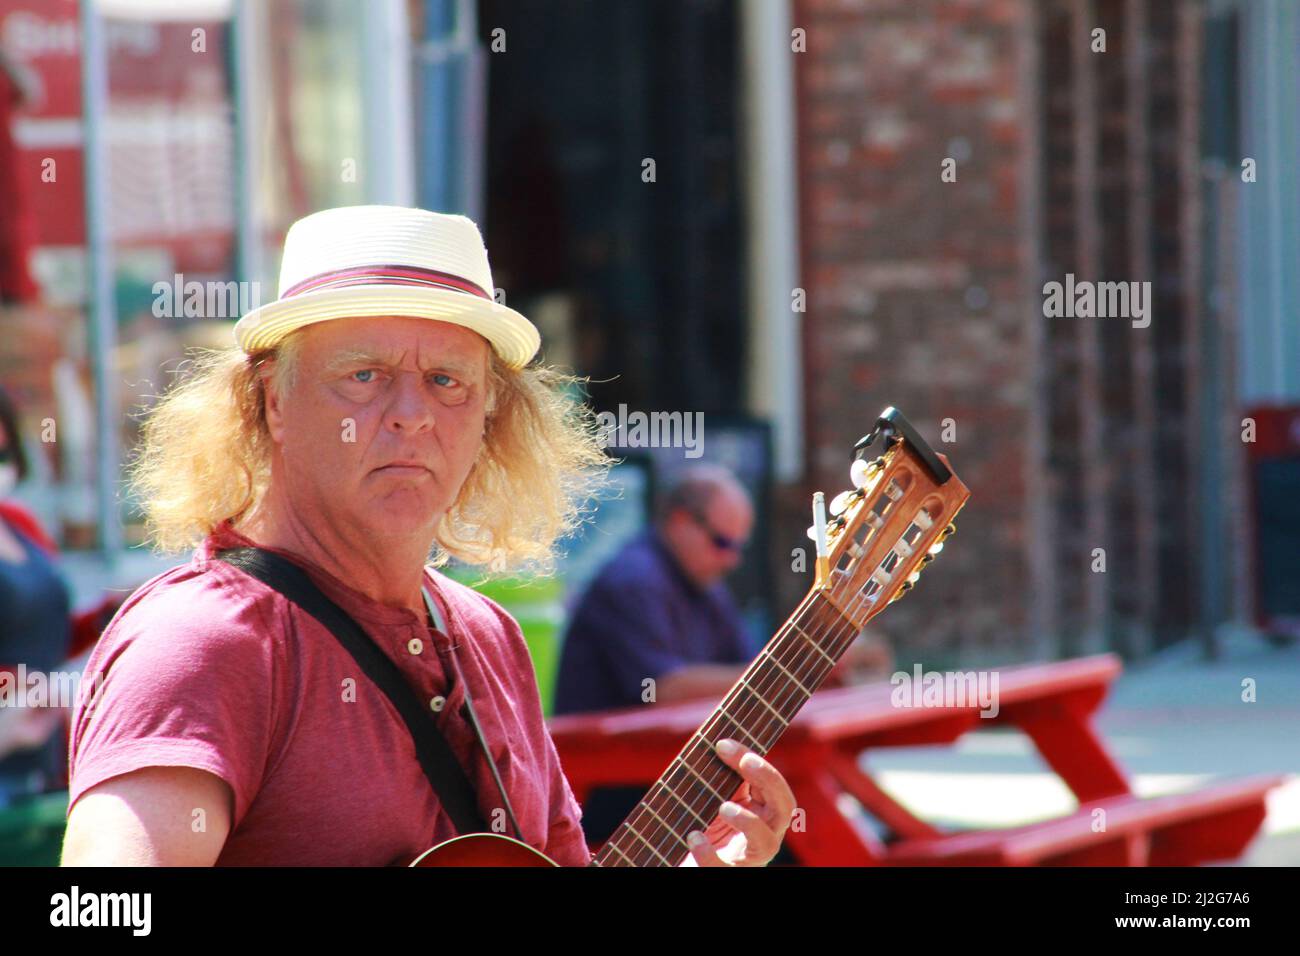 A busker playing a guitar on Water Street, St. John's, NL, Canada Stock Photo